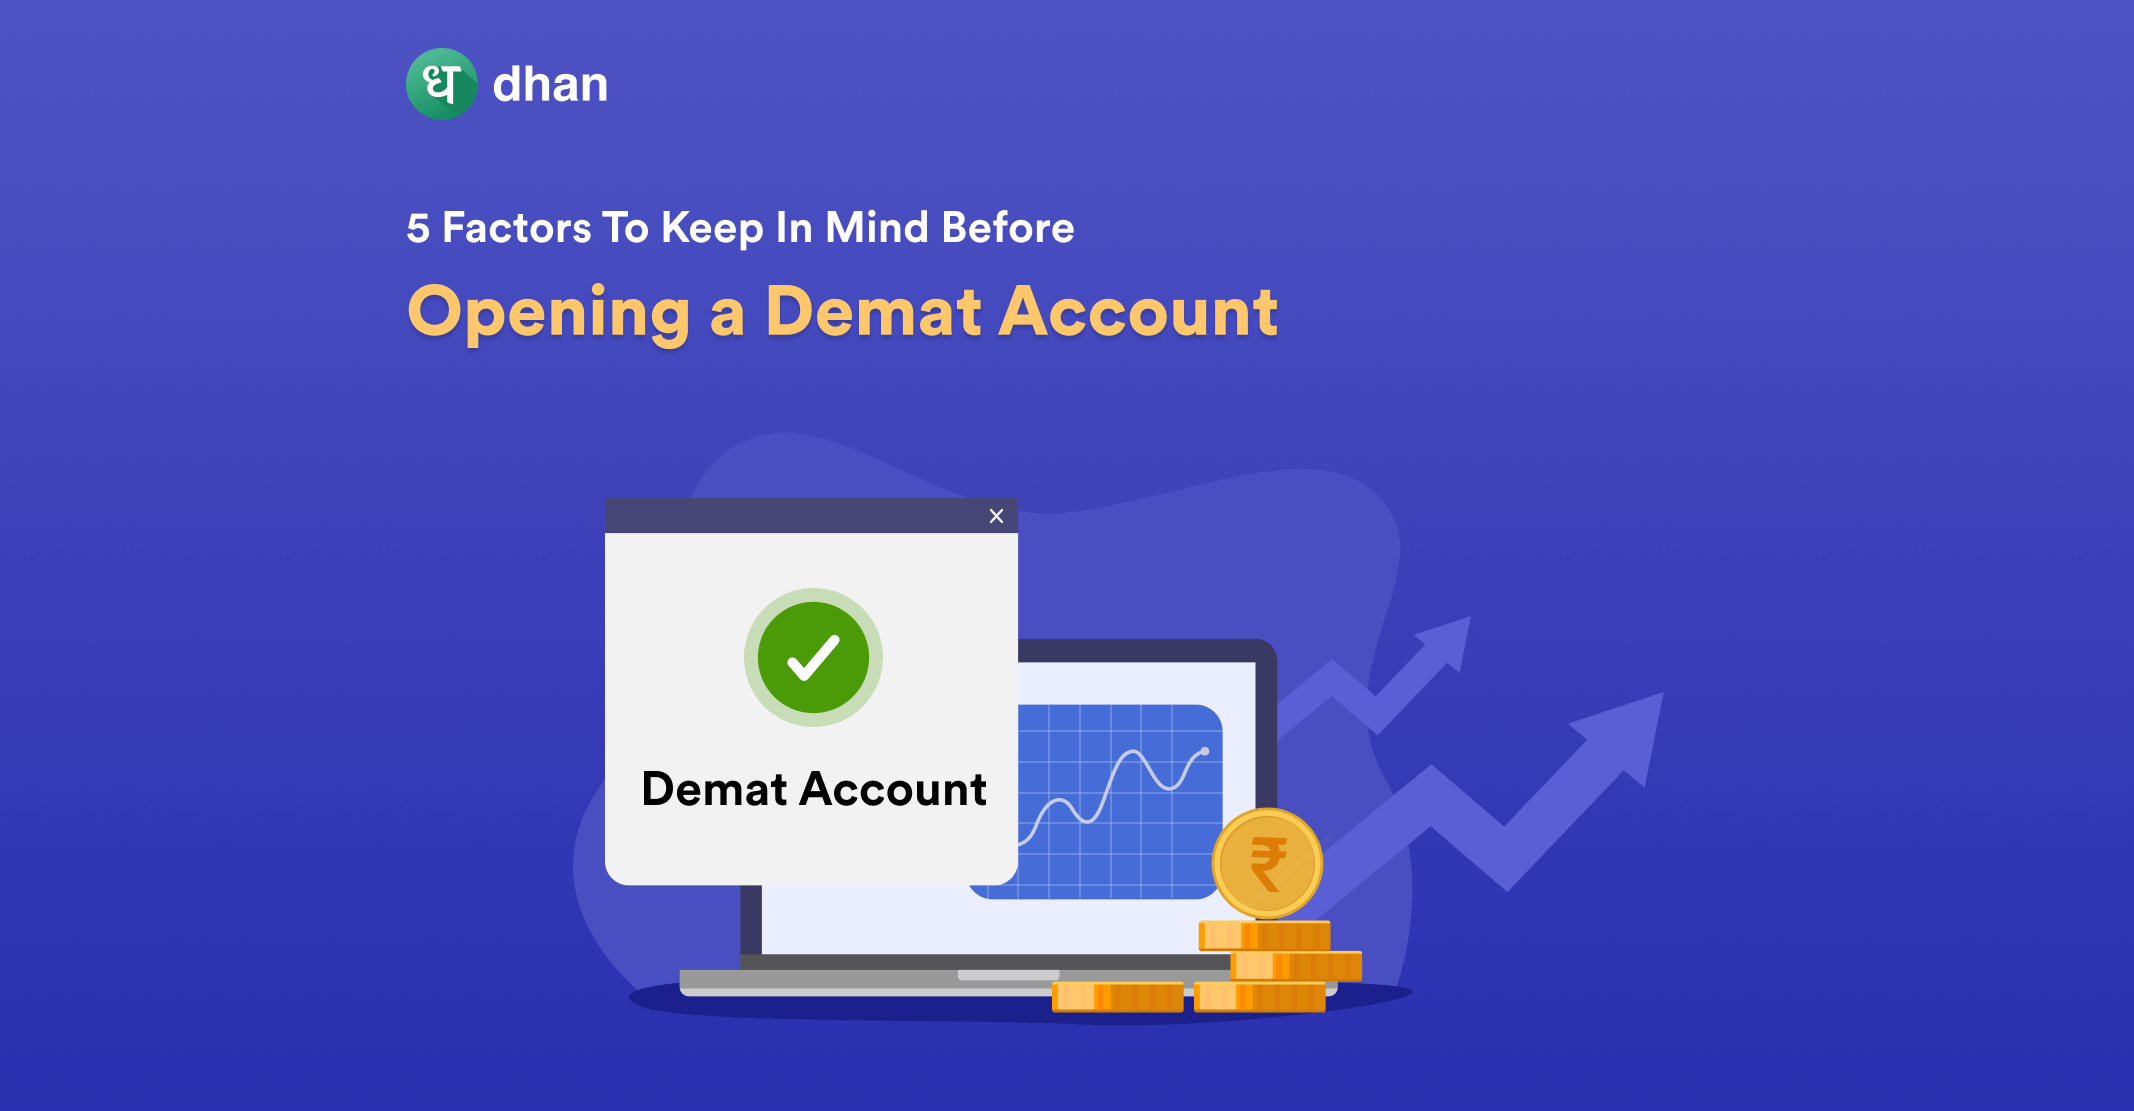 5 Factors to Keep in Mind Before Opening a Demat Account